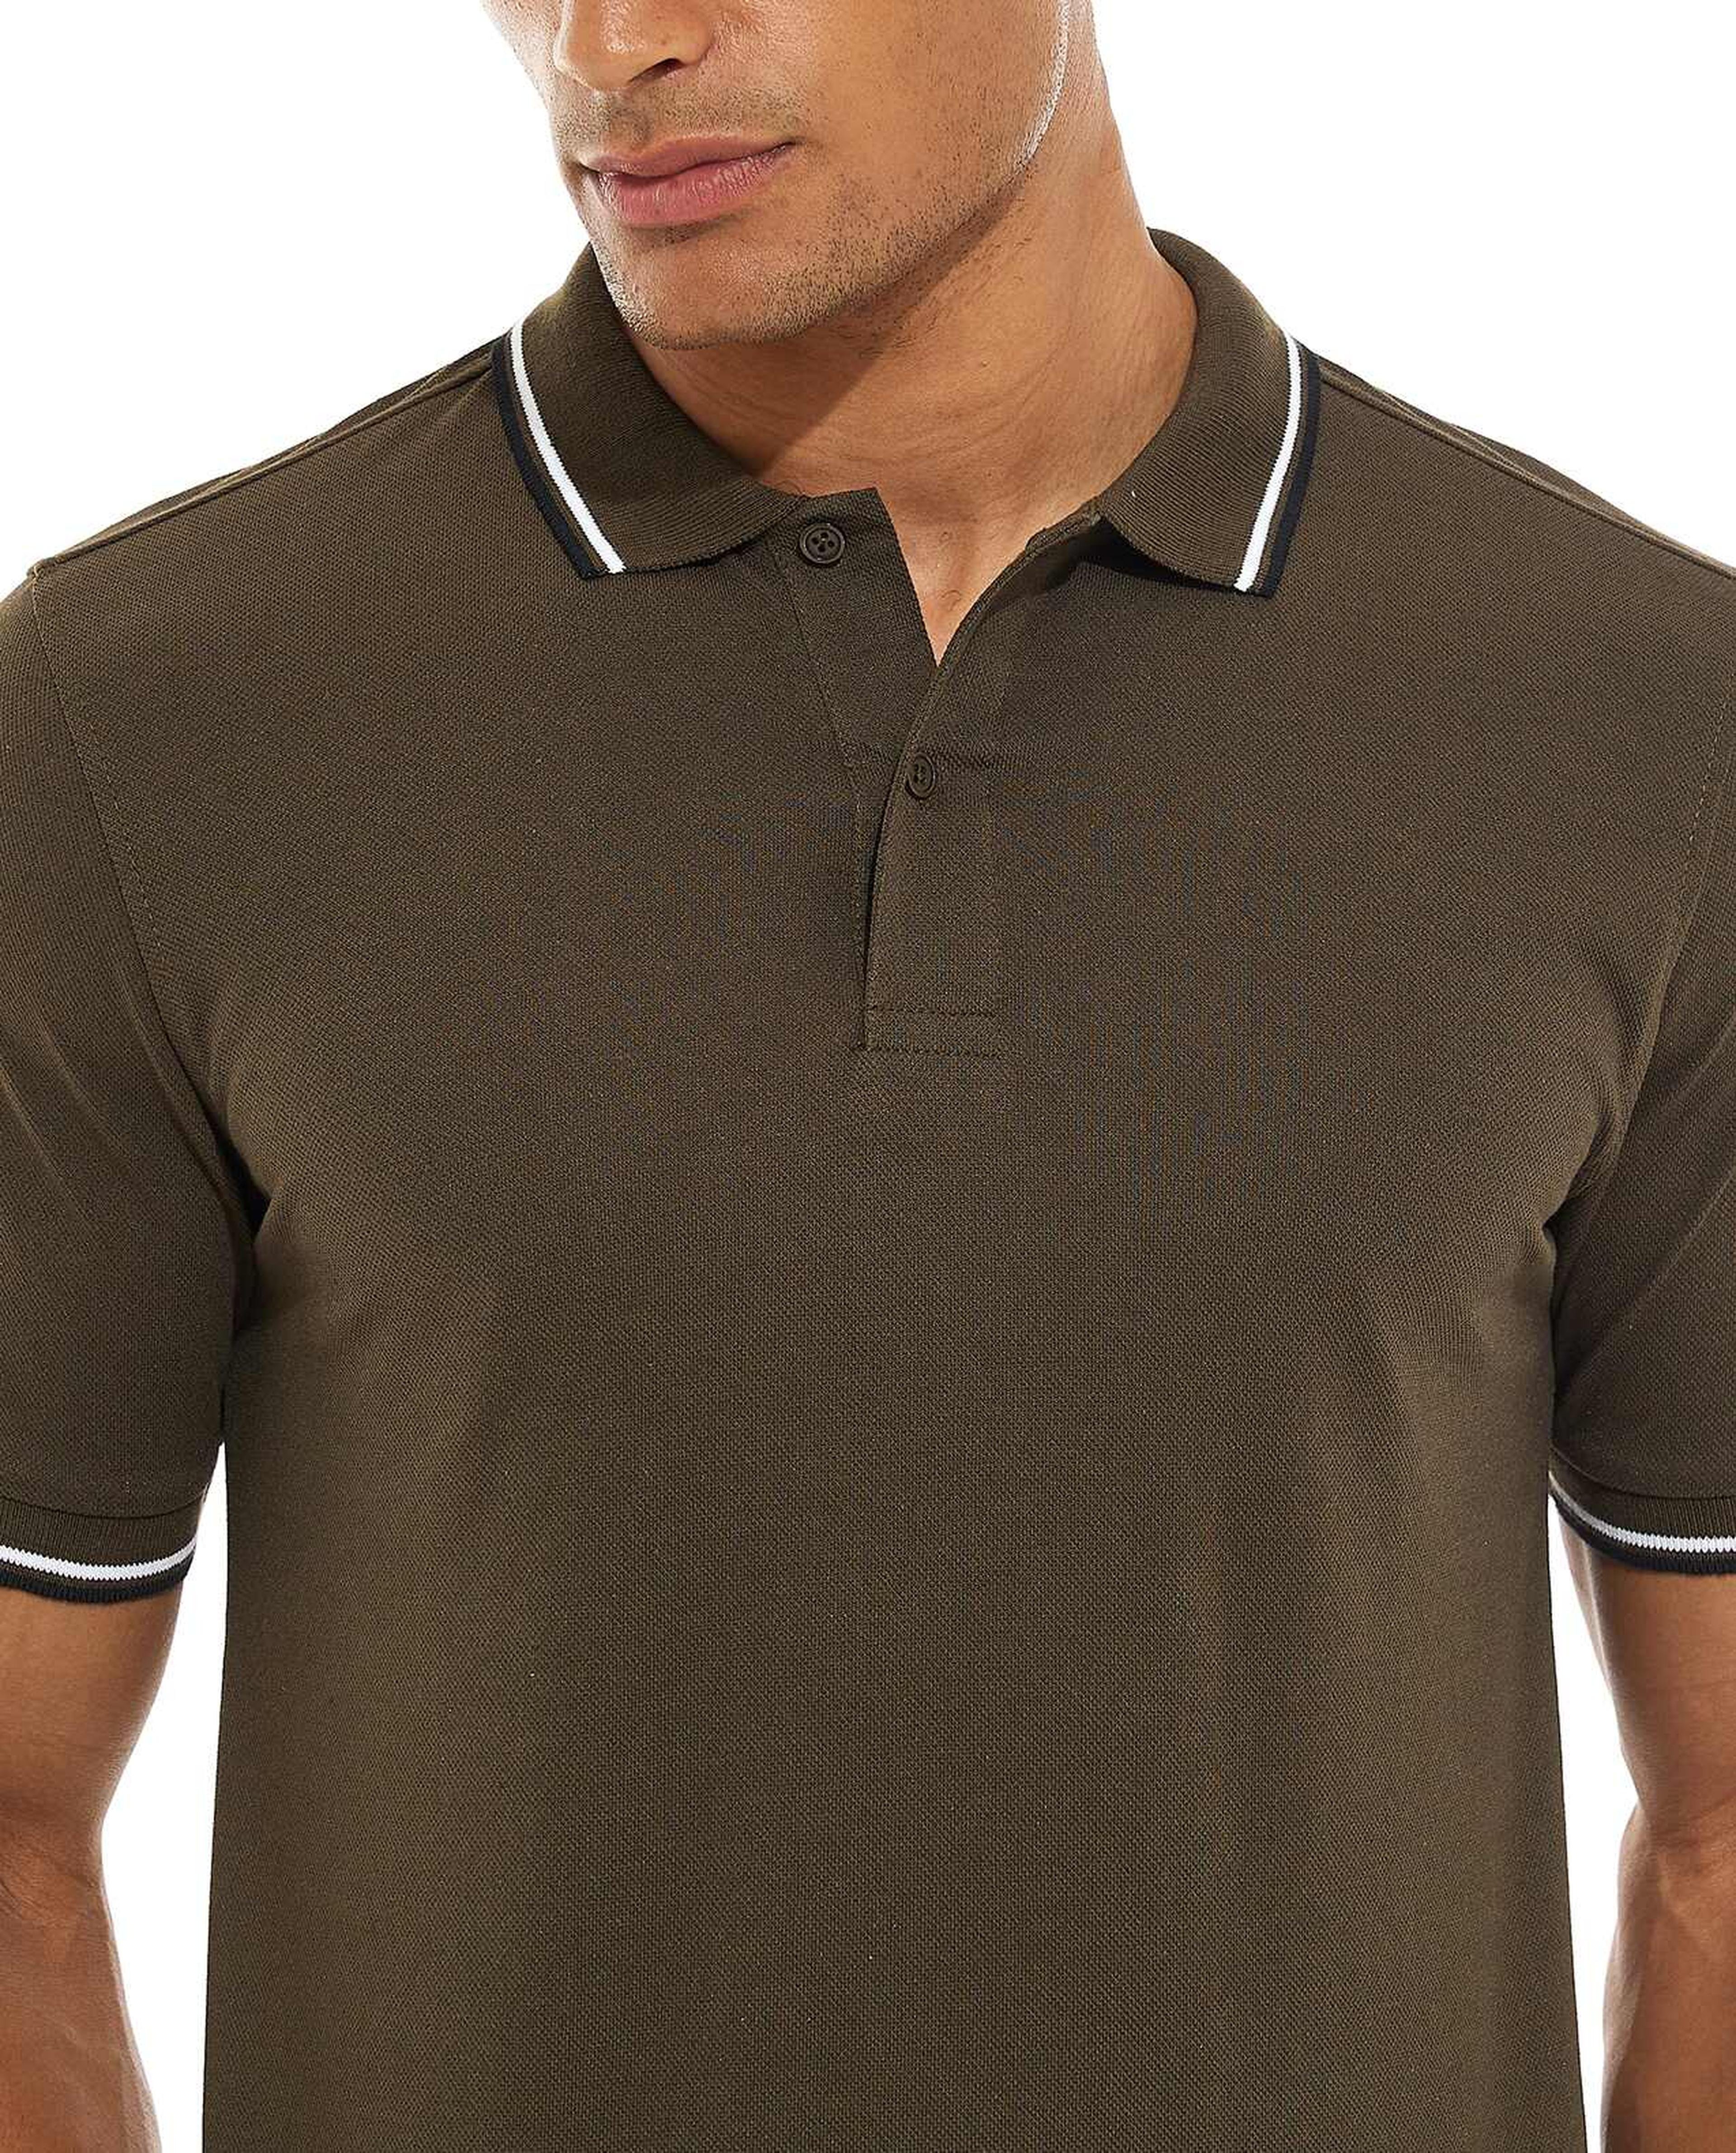 Striped Trim Polo T-Shirt with Short Sleeves